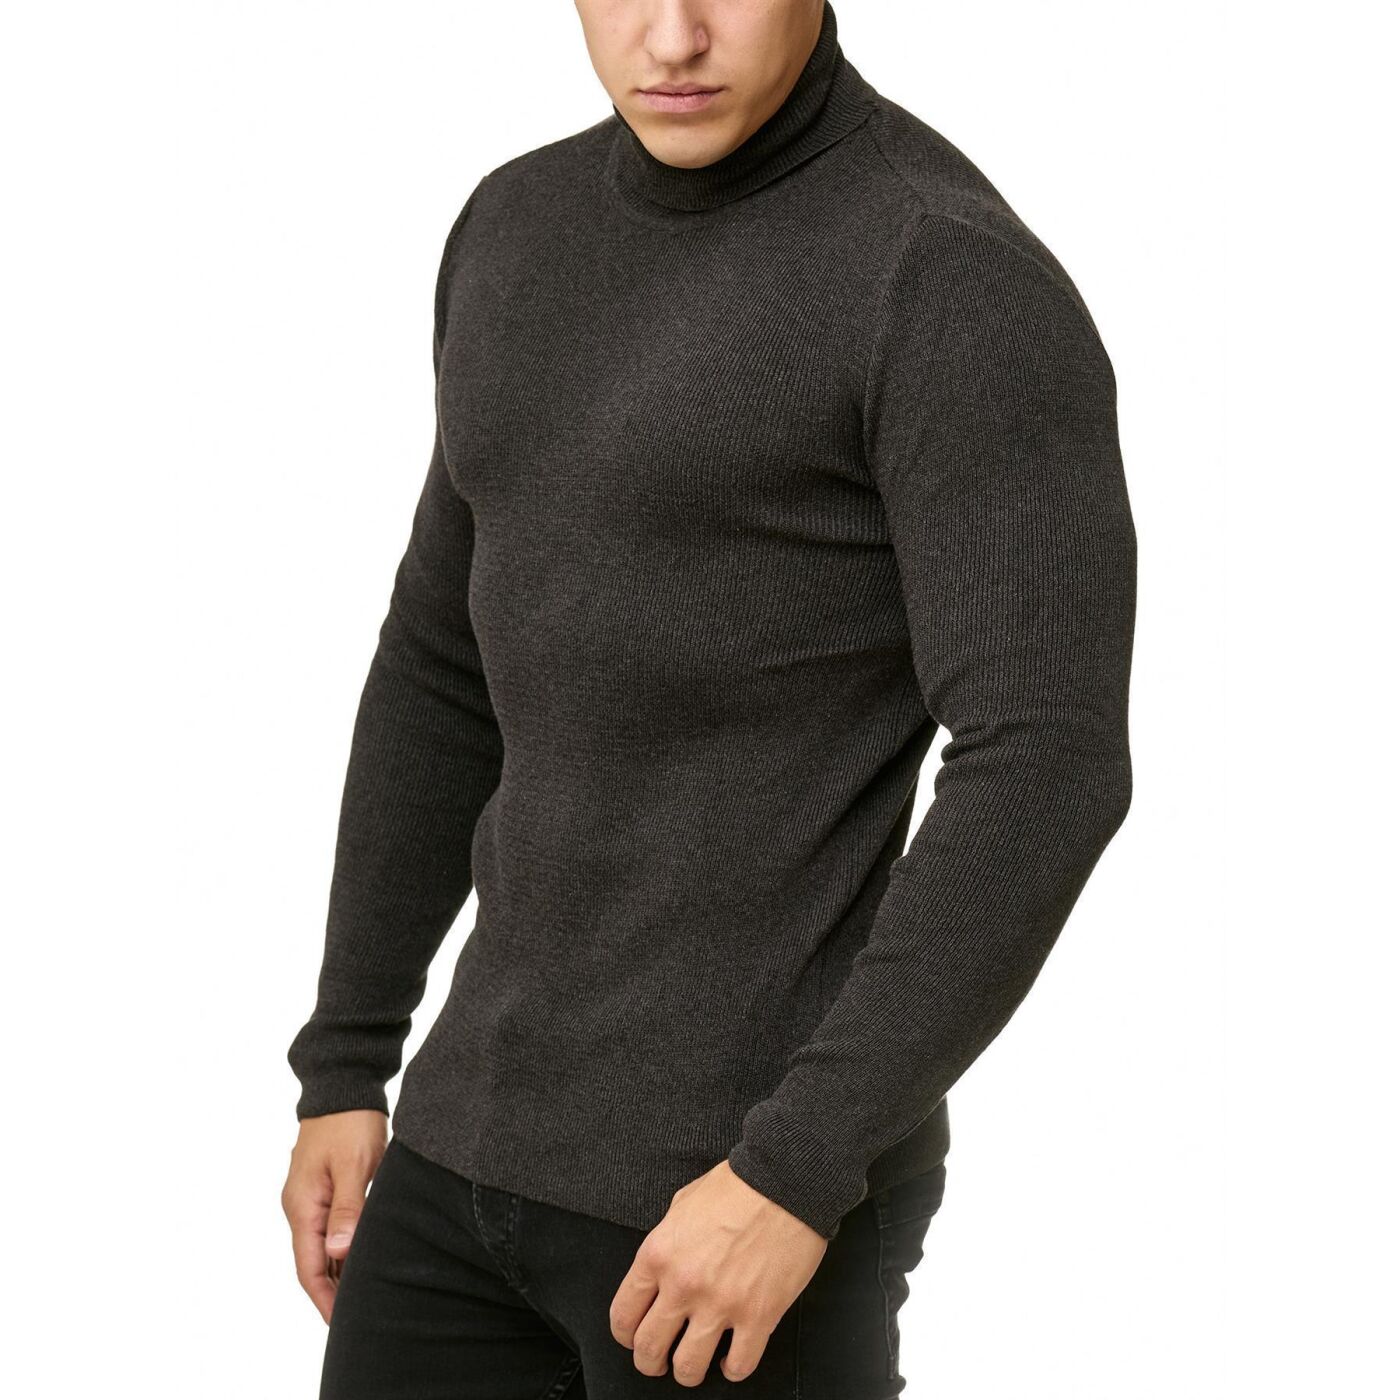 Alion Mens Long Sleeve Casual Wool Cashmere Knitted Sweater Turtleneck Pullover Tops